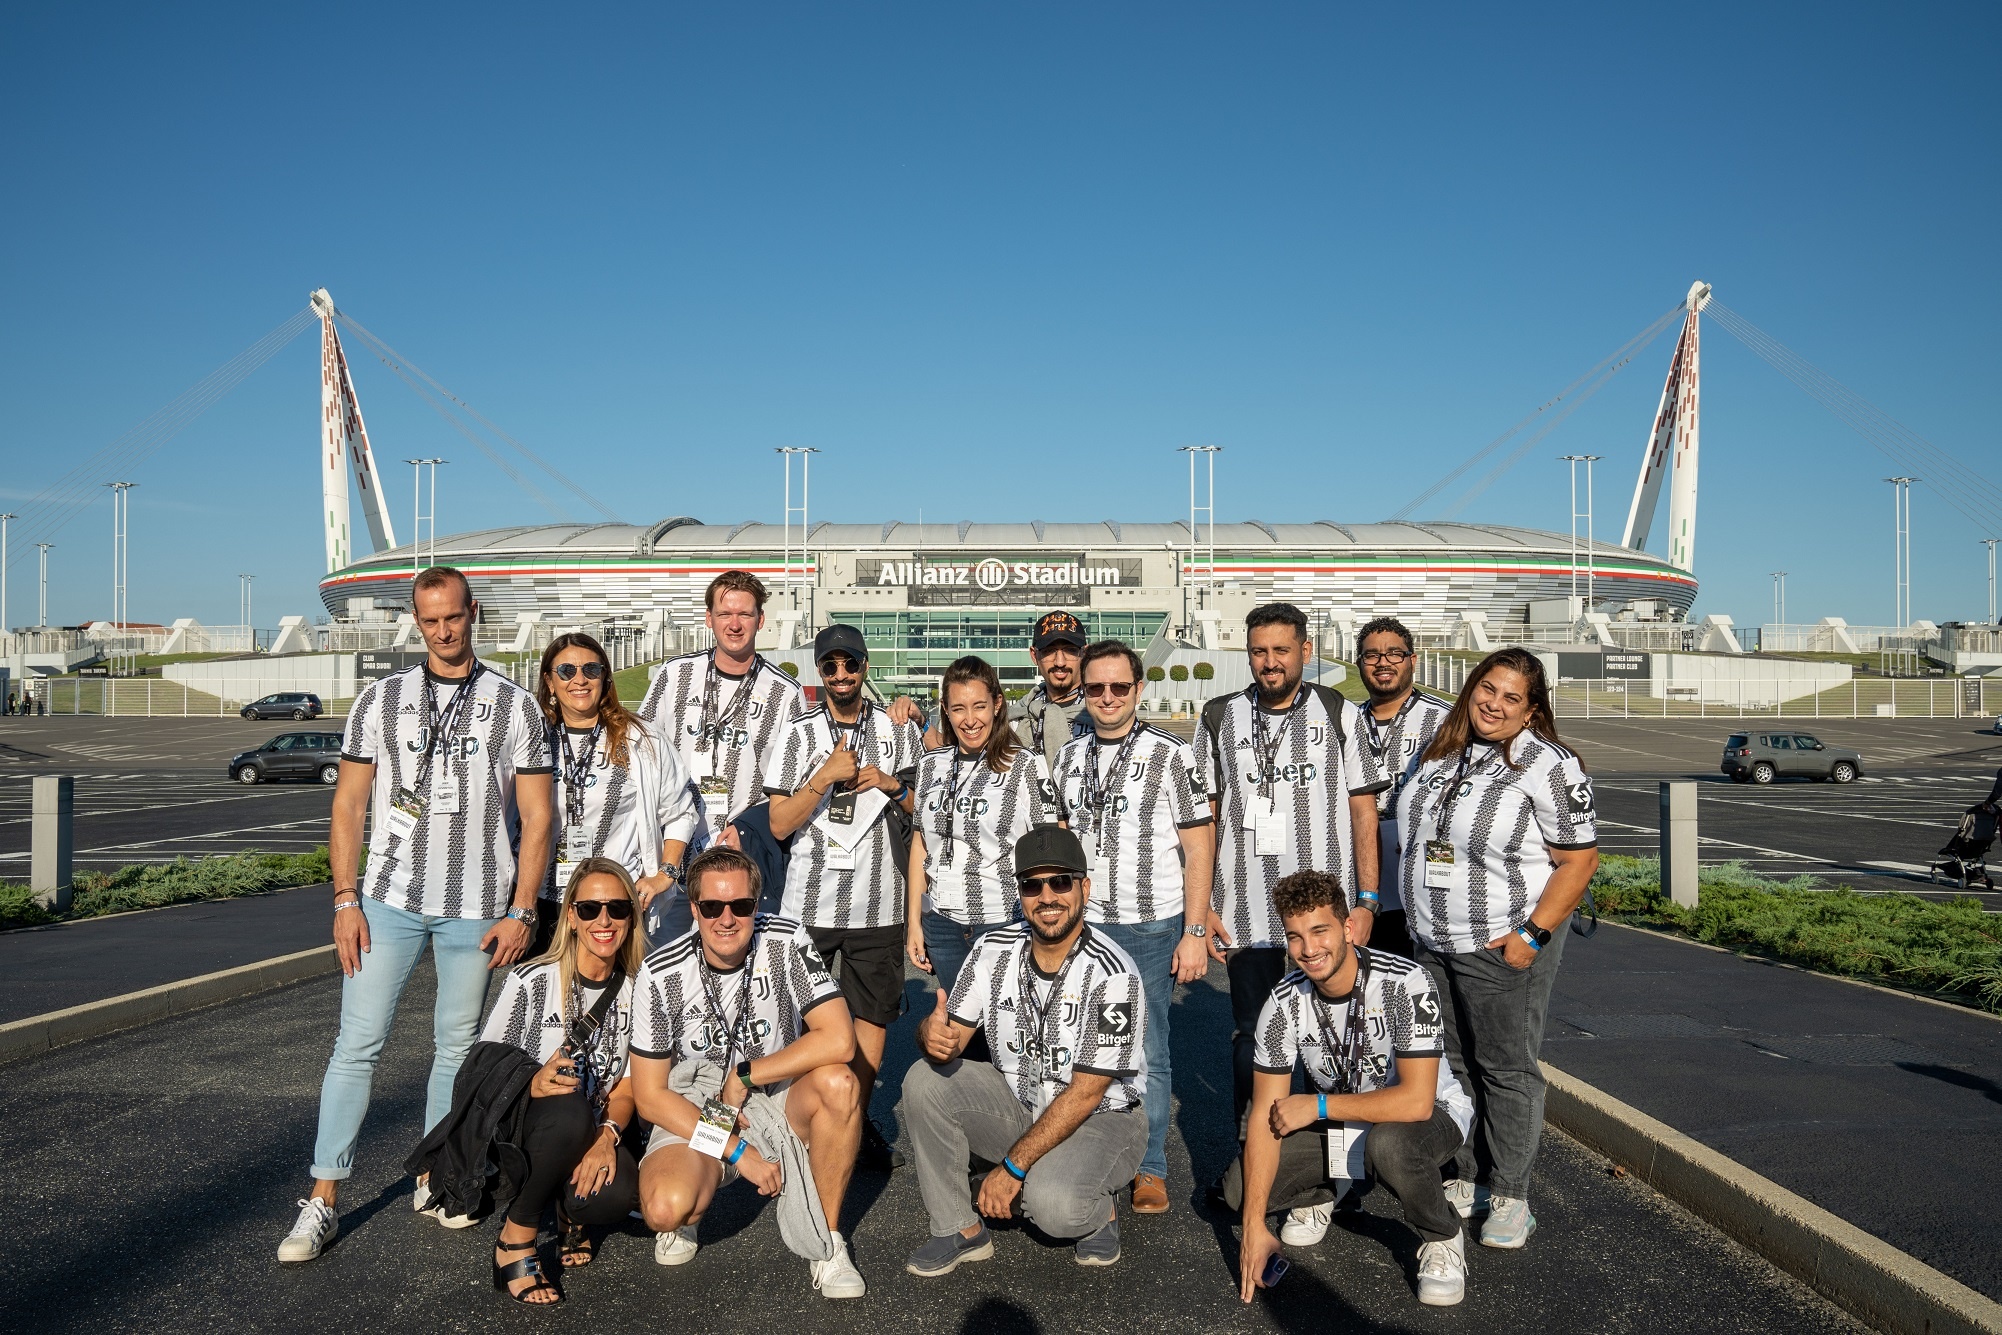 Jeep Middle East Sends 11 Lucky Jeep Owners On A Once In A Lifetime Experience With The Juventus F.C. Team In Italy